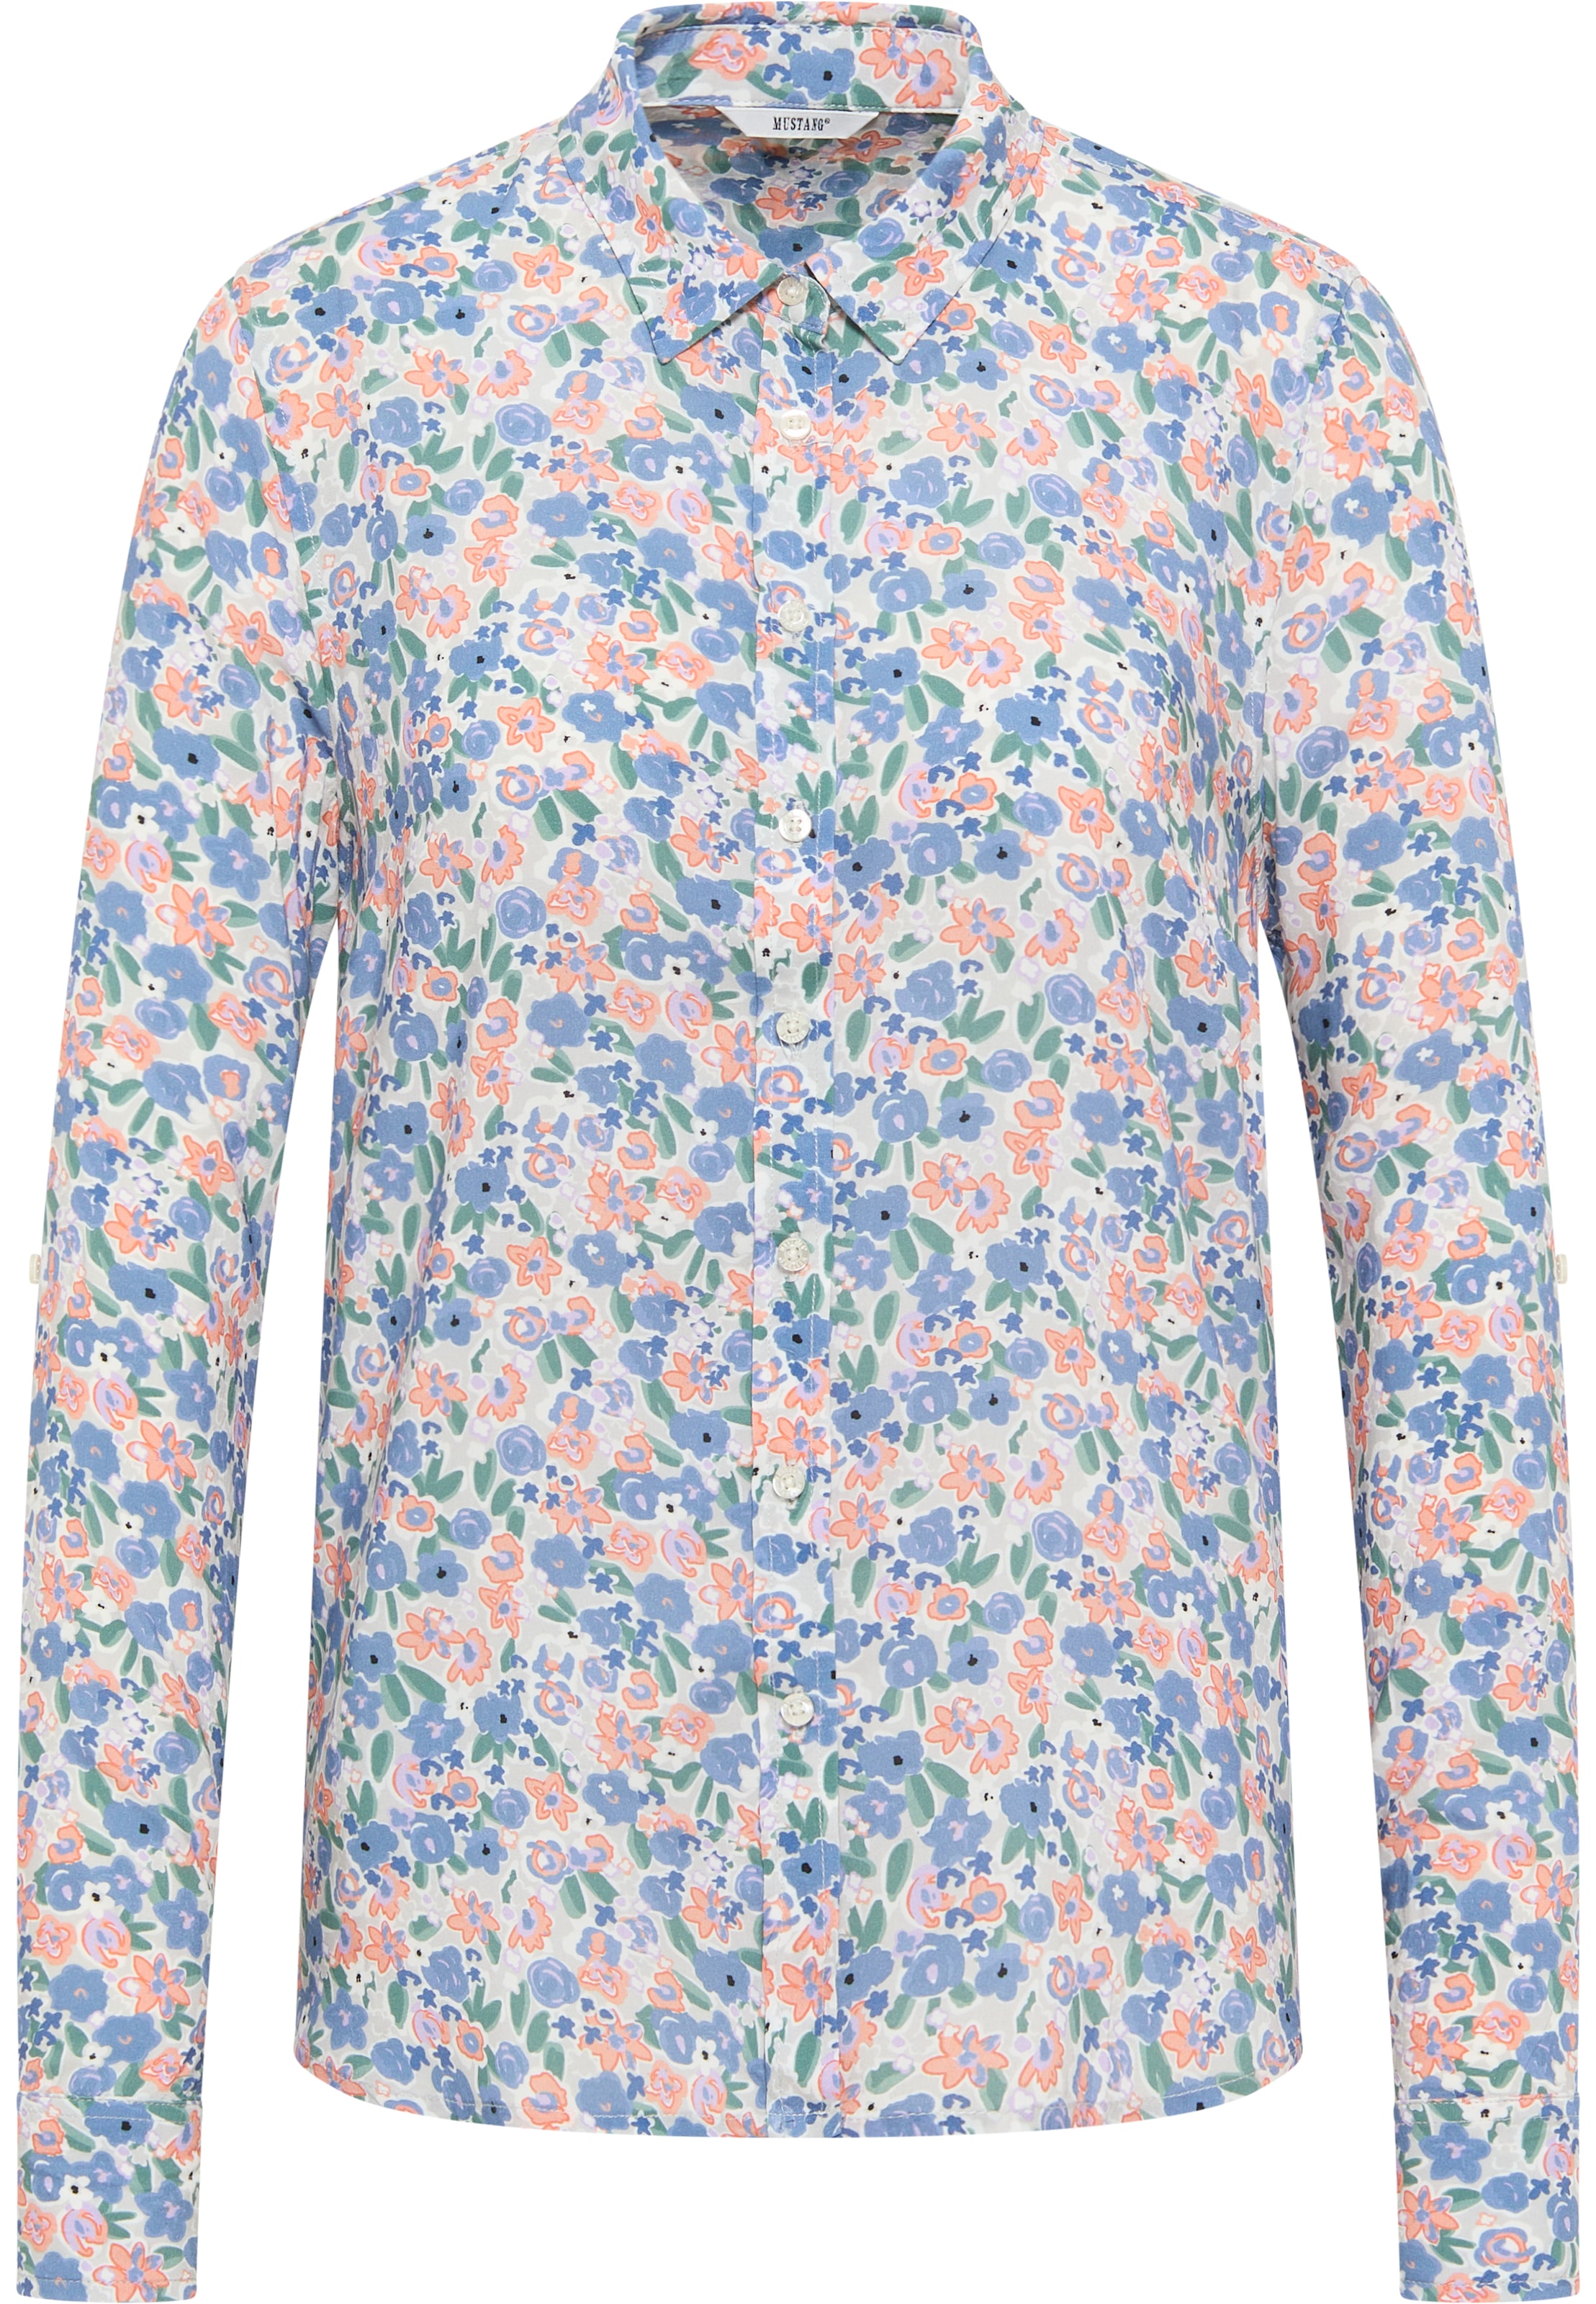 Turnup« Bluse Klassische ♕ bei Emma Floral »Style MUSTANG